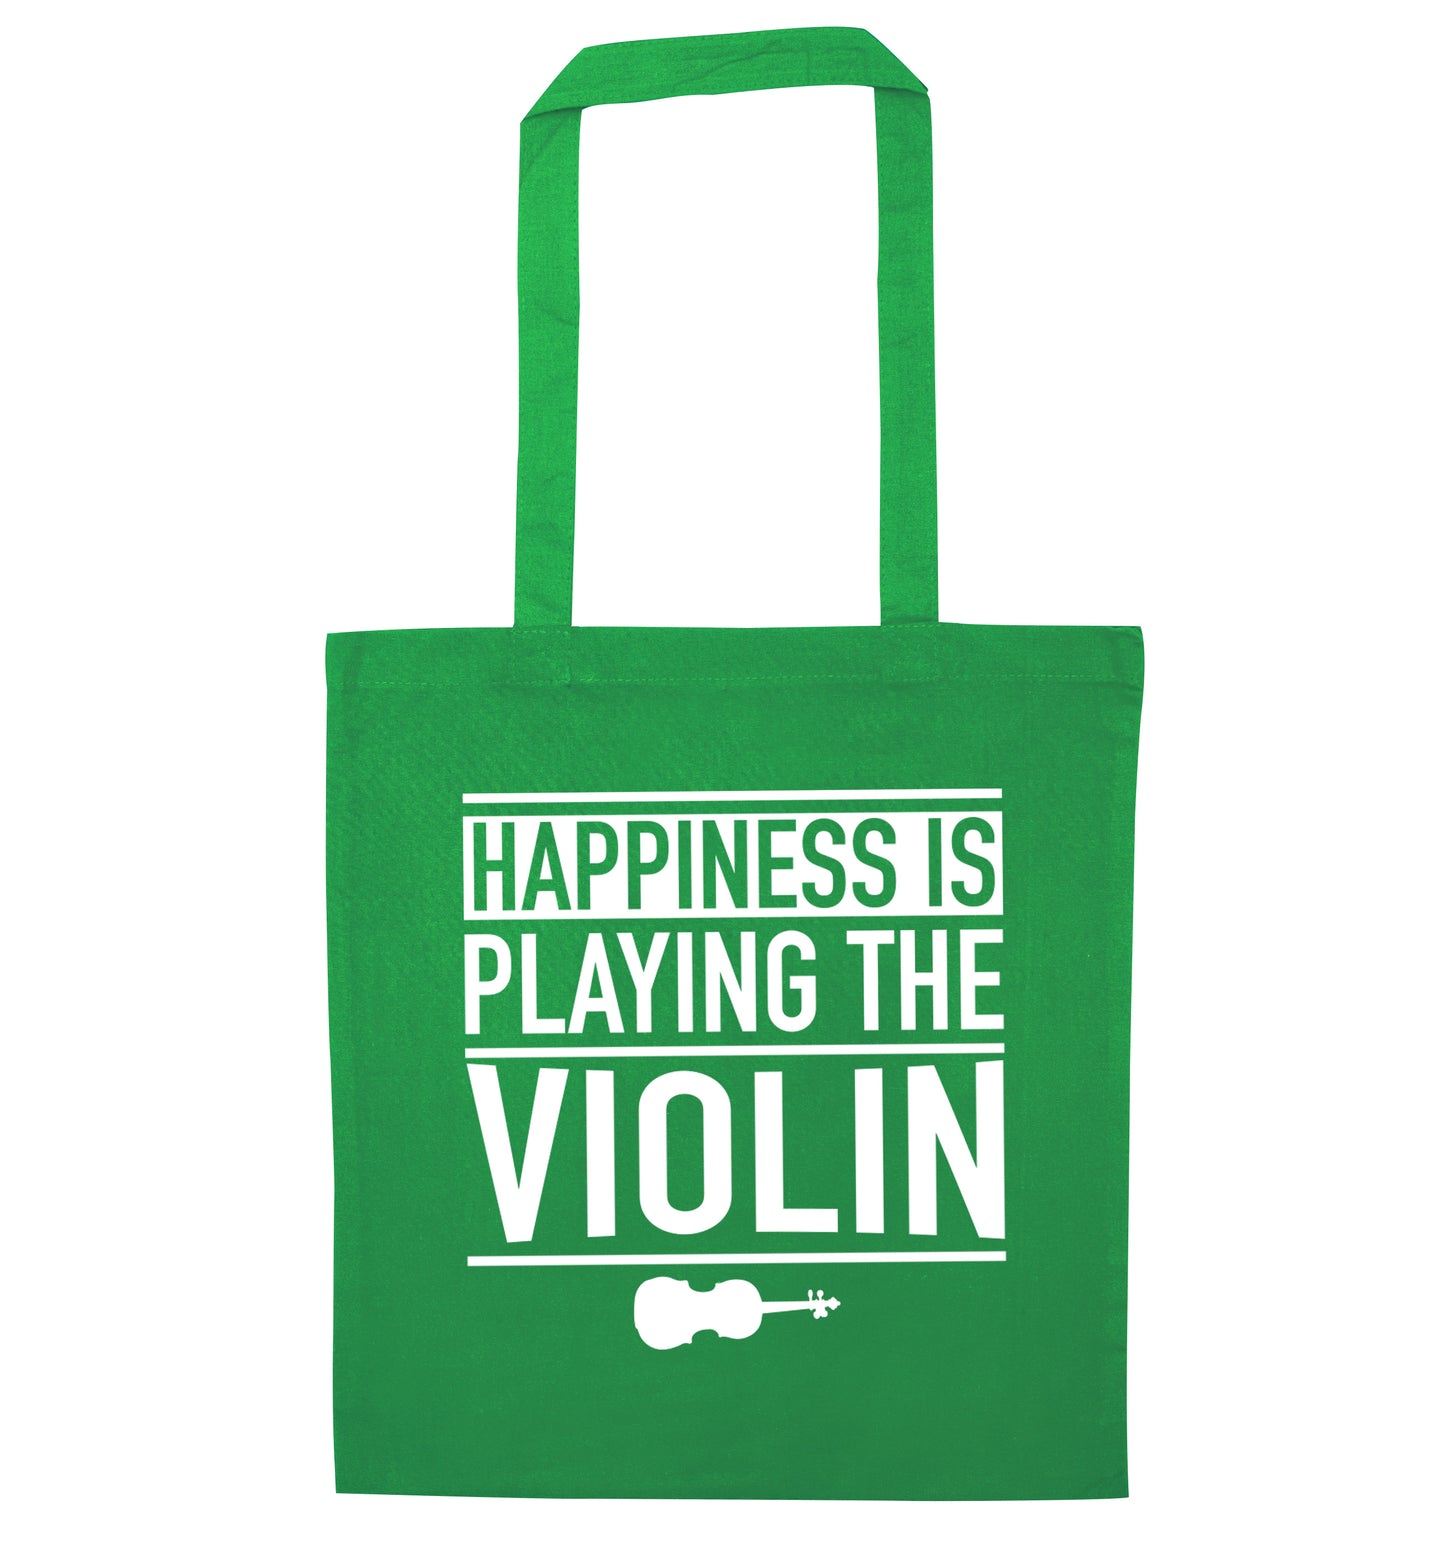 Happiness is playing the violin green tote bag